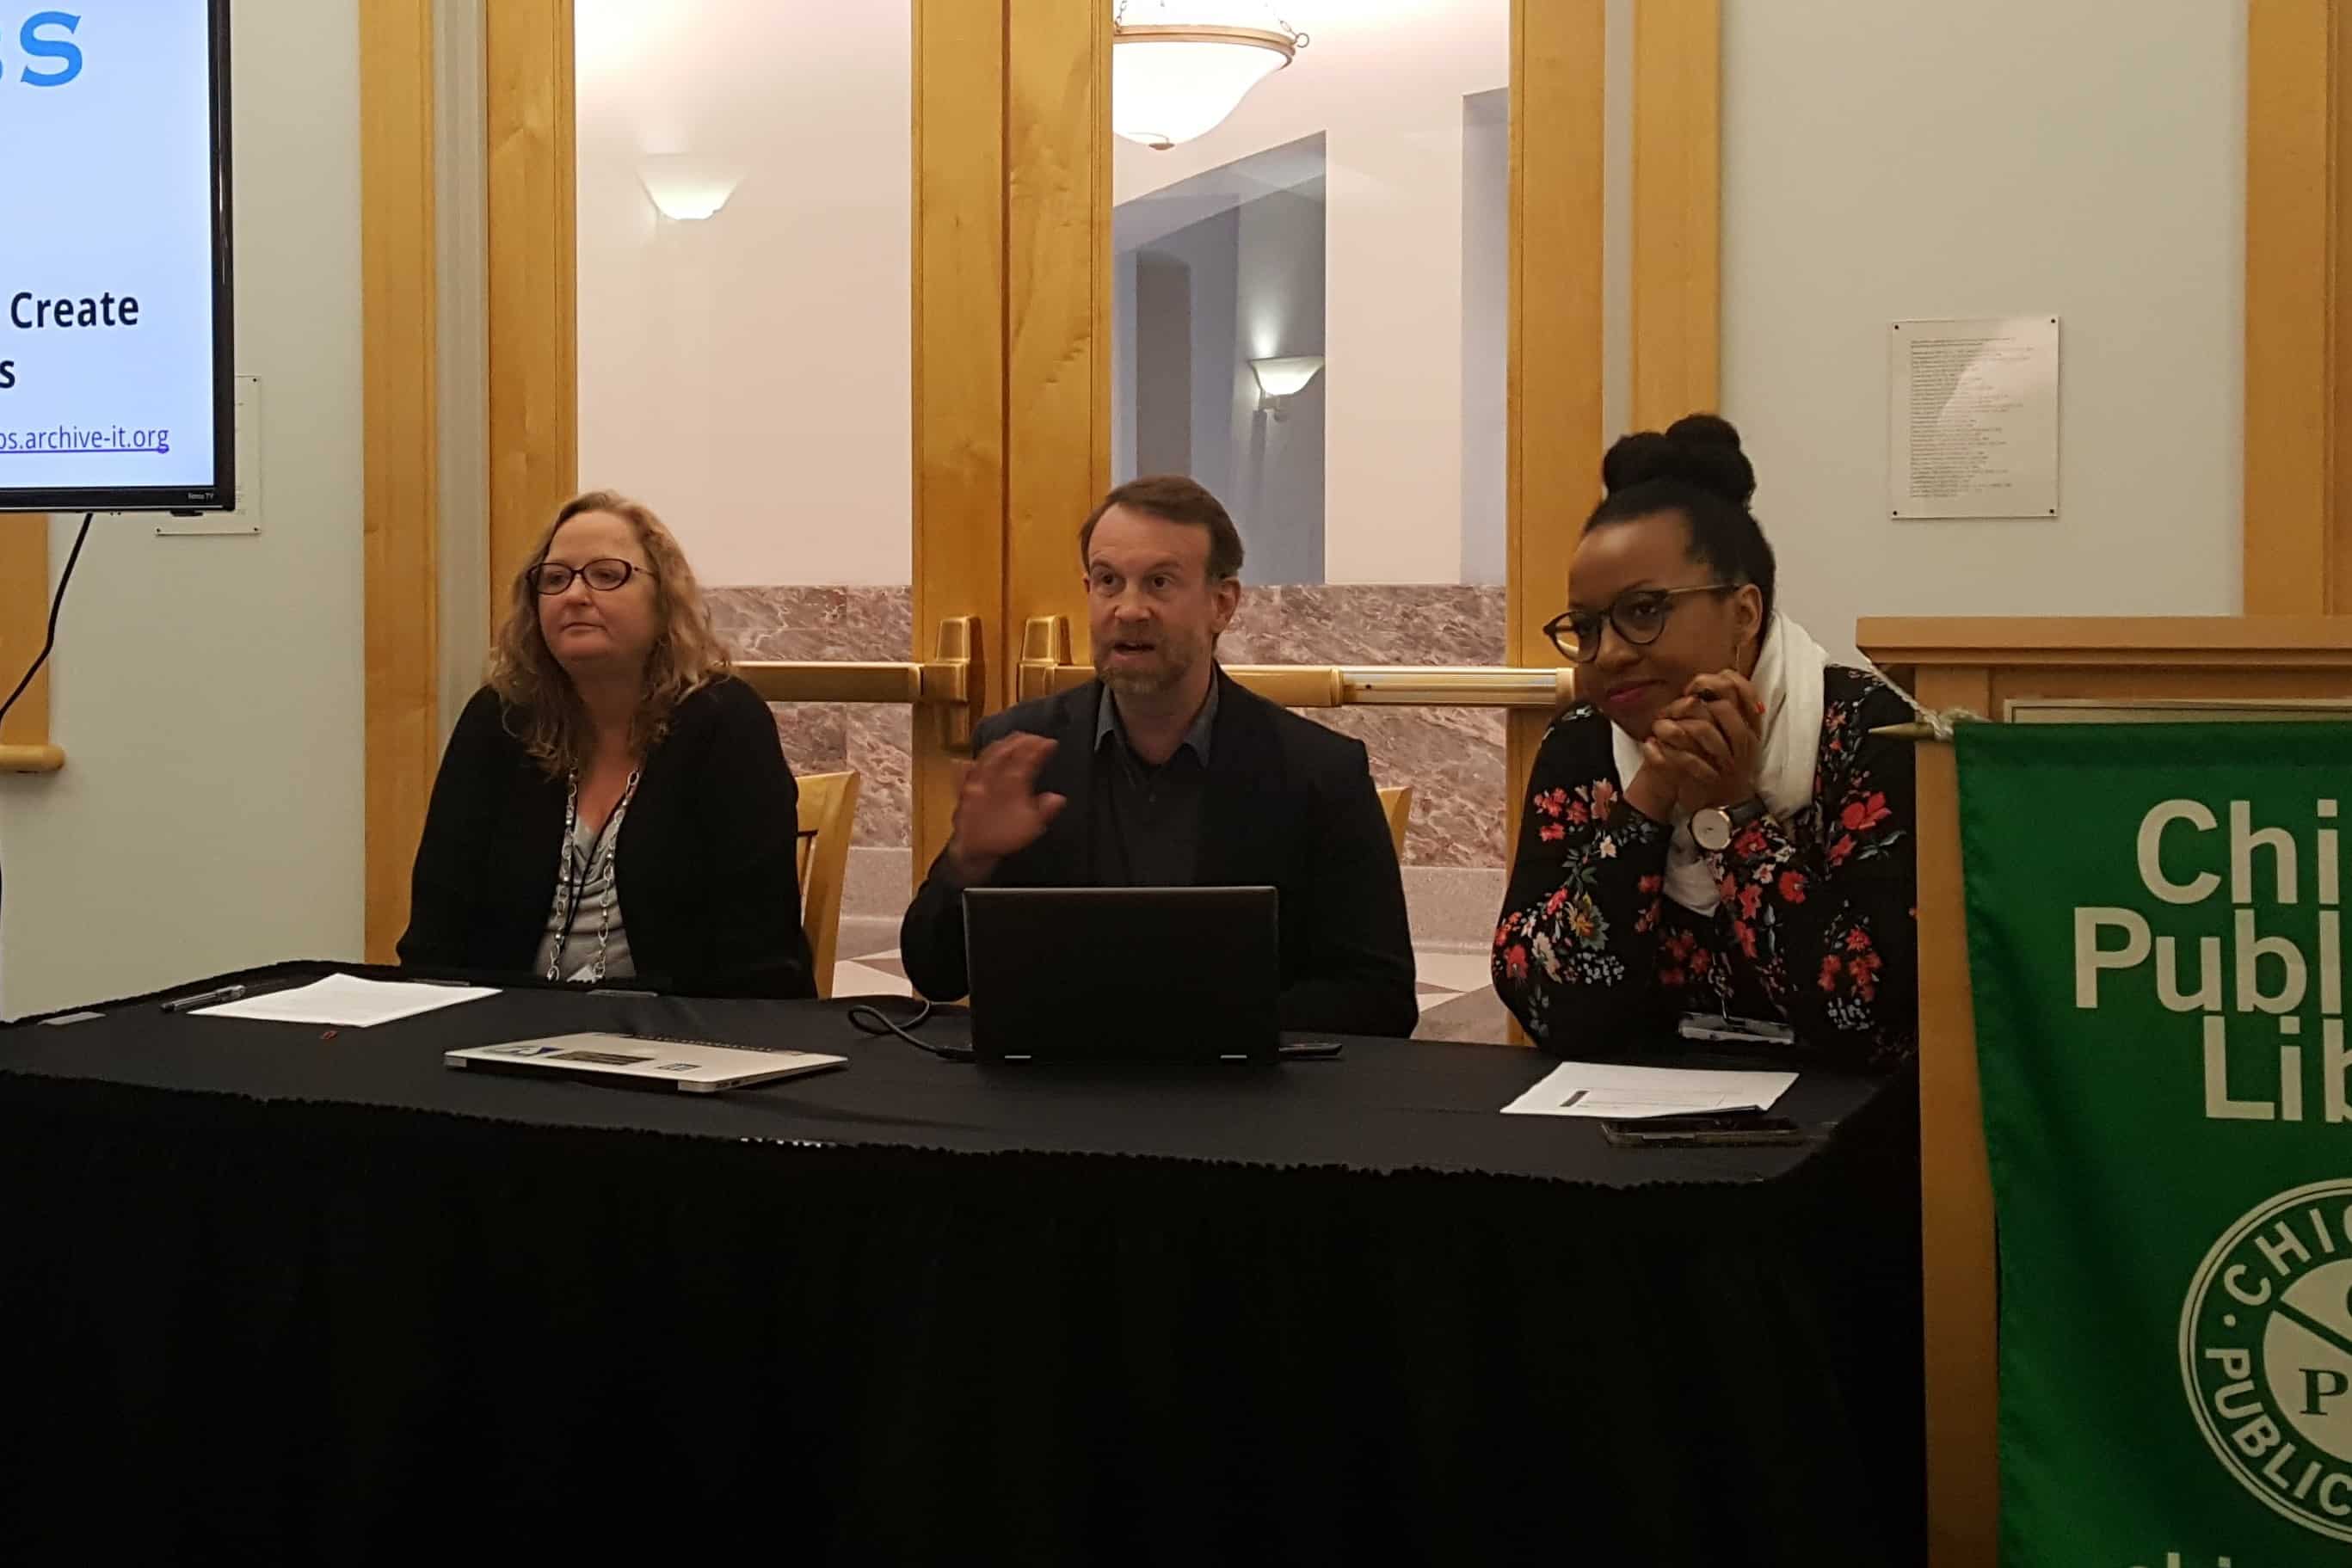 From left: Melinda Shelton, Jefferson Bailey, and Makiba Foster discuss the Community Webs archiving program at DPLAfest 2019 in Chicago. Photo: Carrie Smith/American Libraries